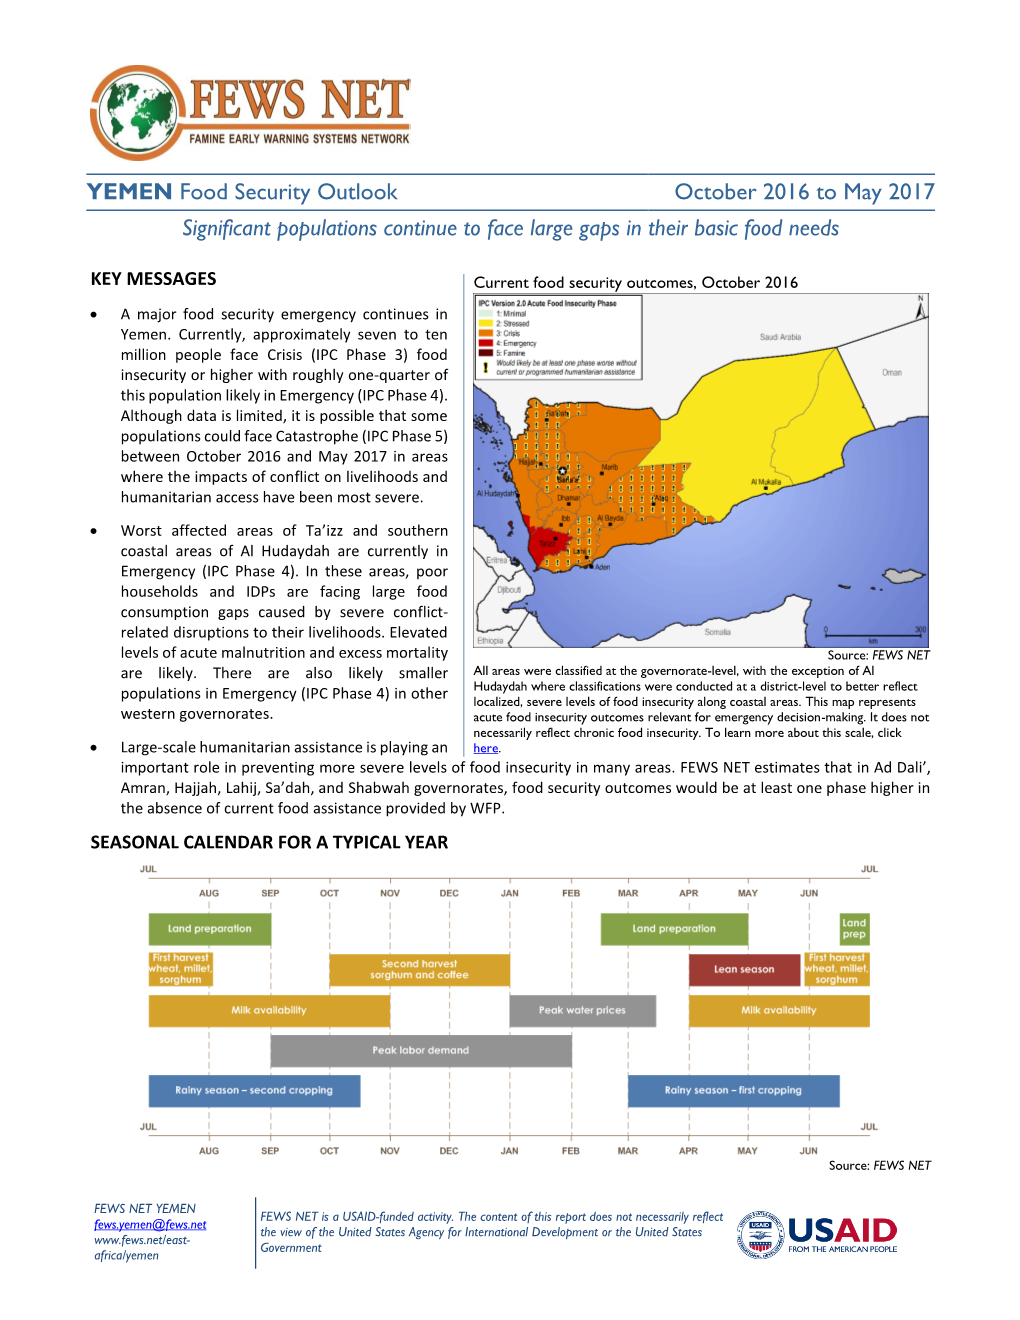 YEMEN Food Security Outlook October 2016 to May 2017 Significant Populations Continue to Face Large Gaps in Their Basic Food Needs